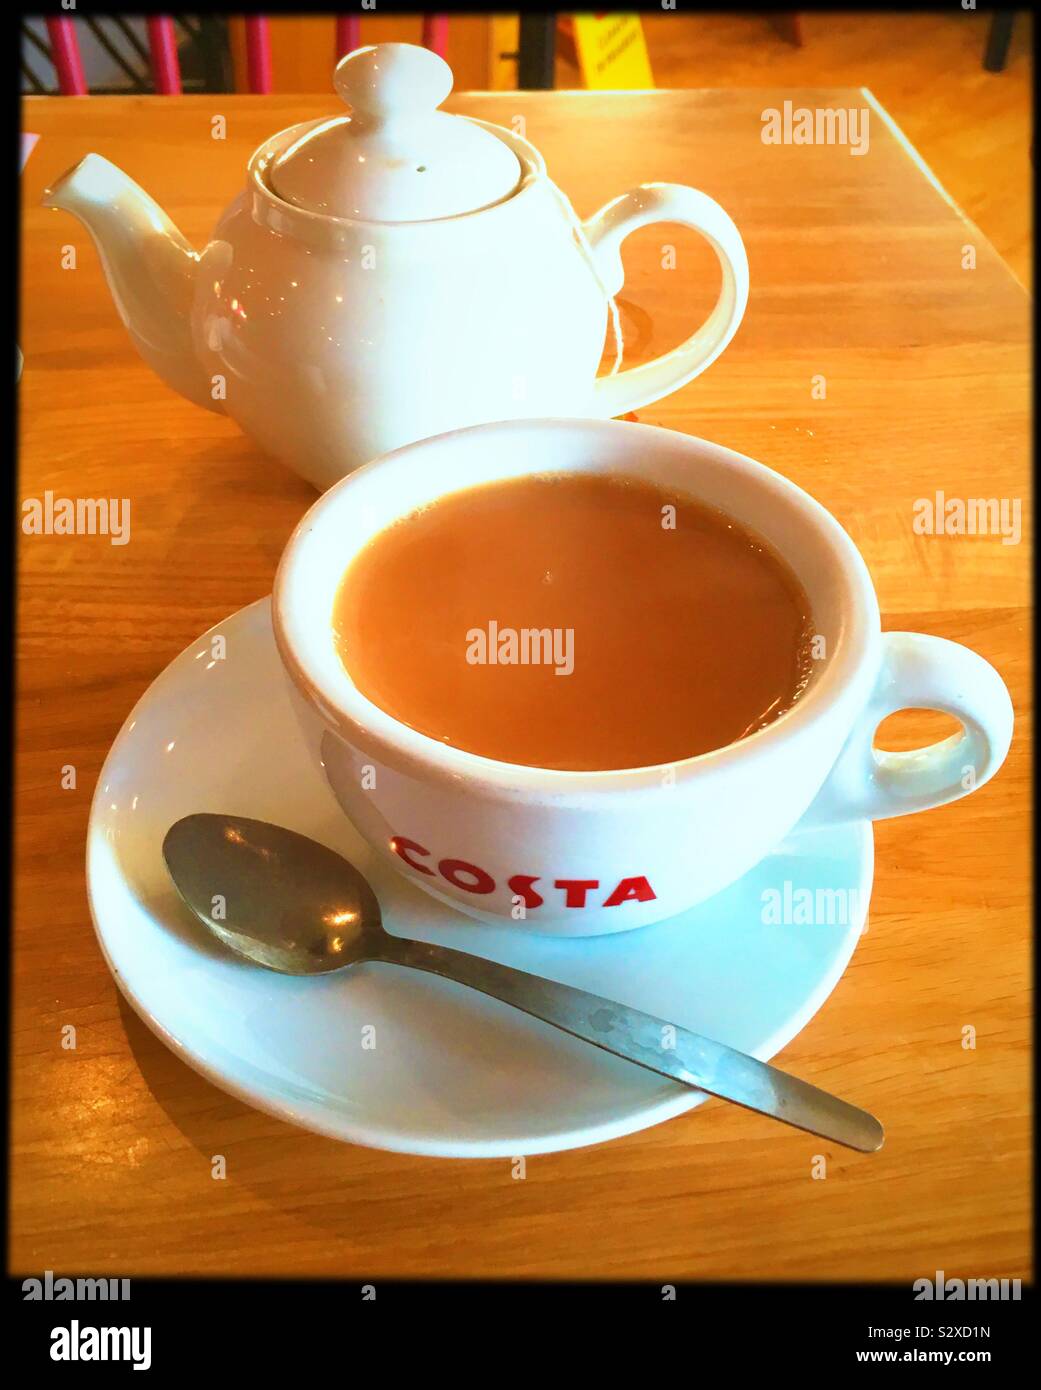 A cup of tea in a cafe with white cup and saucer, white teapot and a teaspoon, on a wooden table. Stock Photo